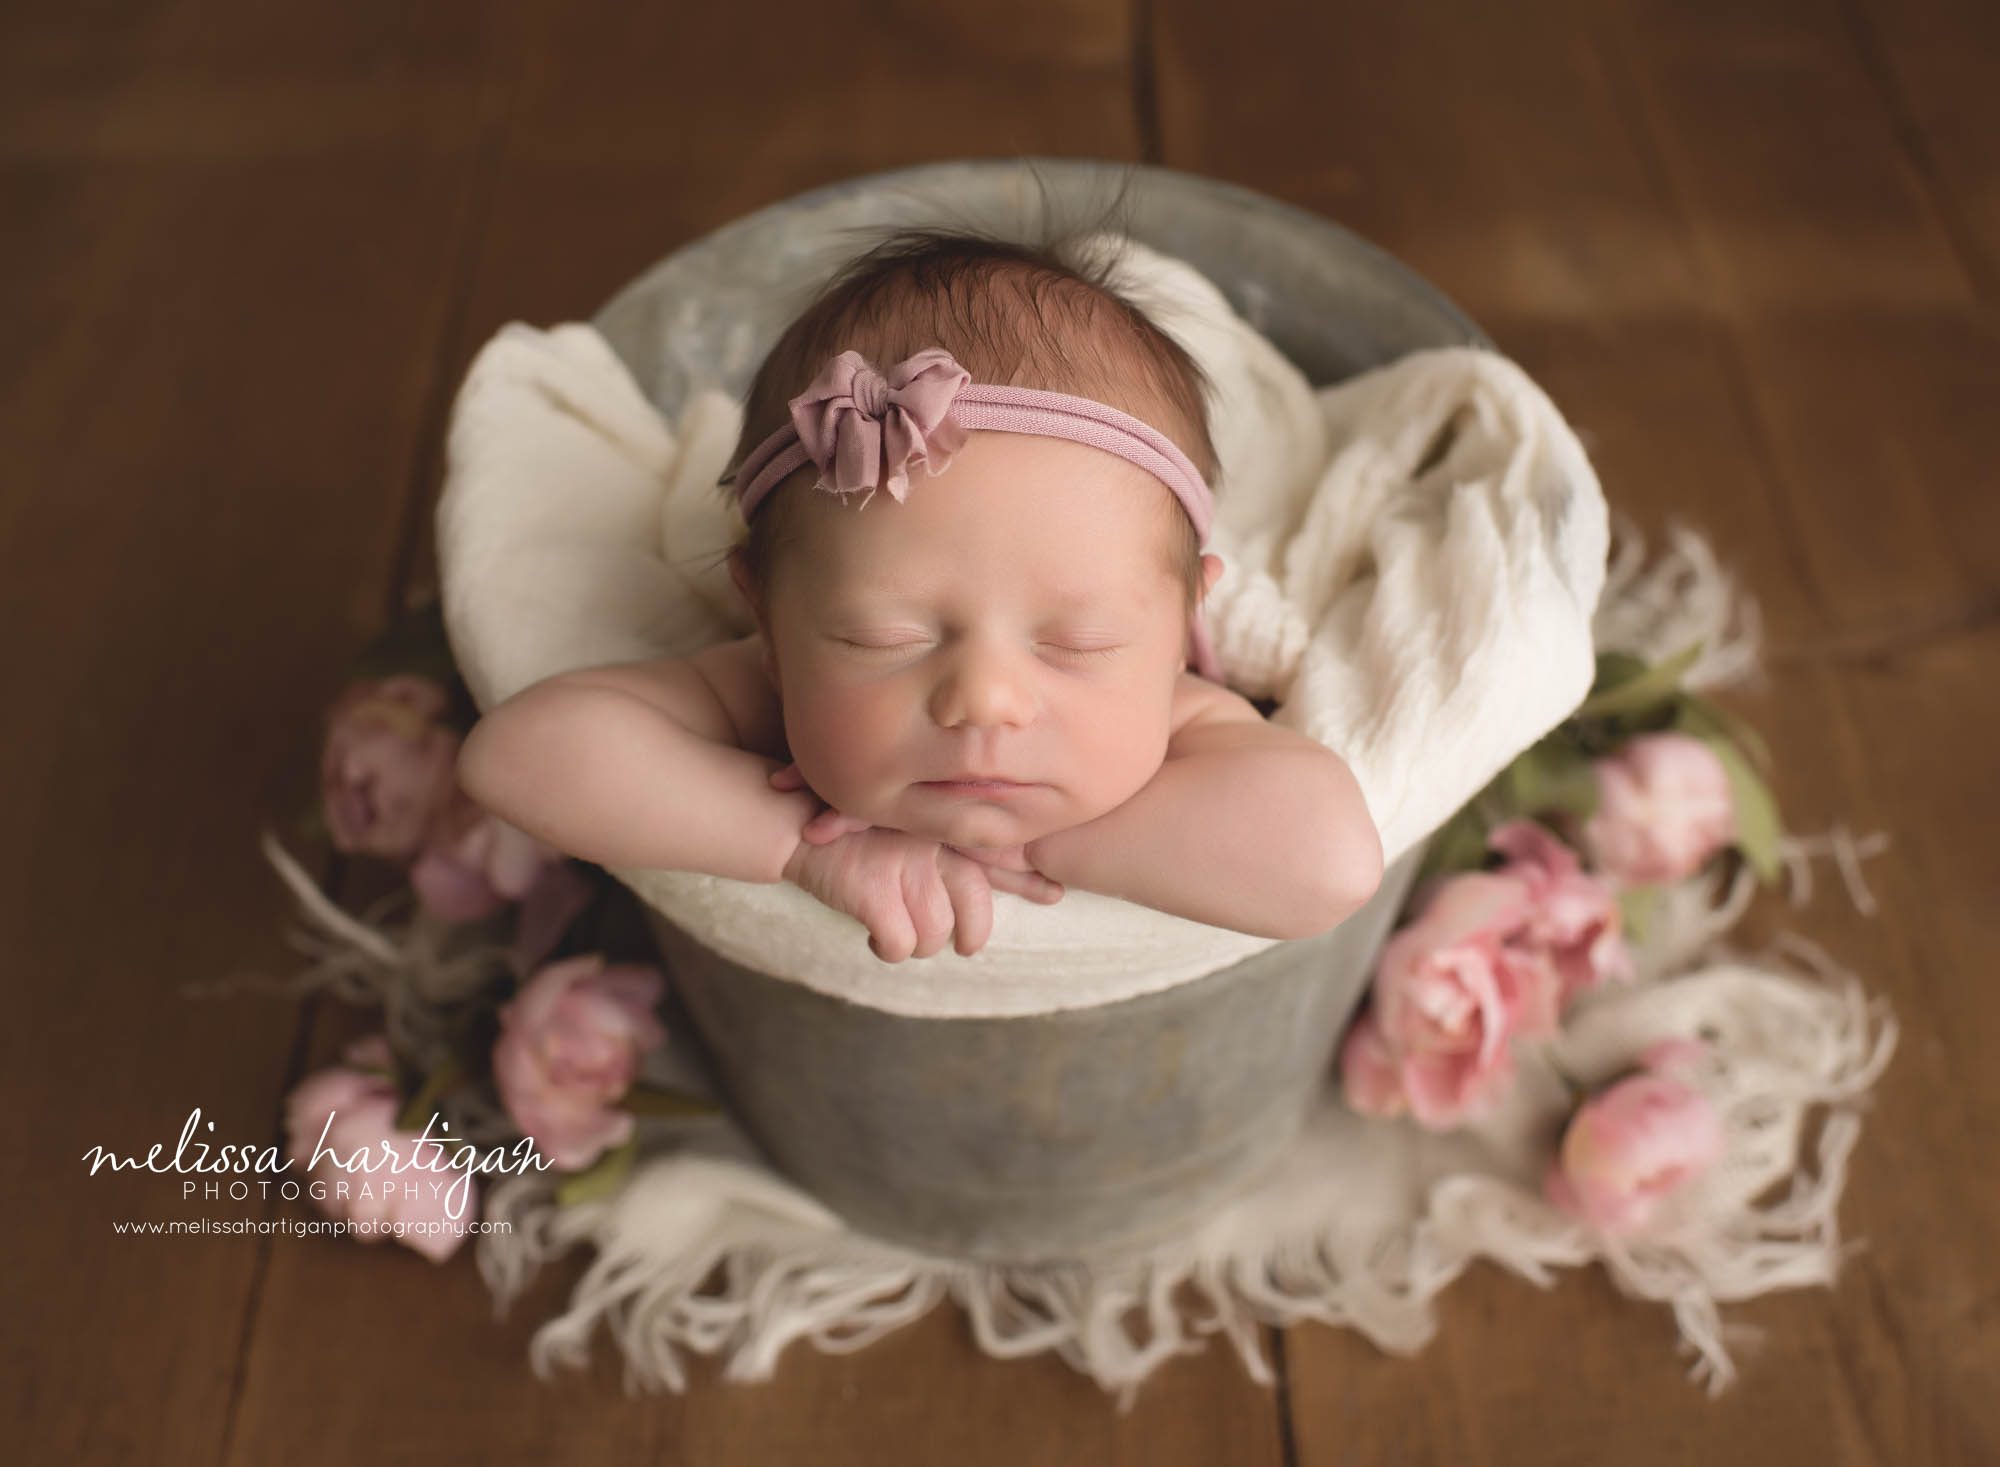 newborn baby girl posed in bucet with floral elements beside bucket